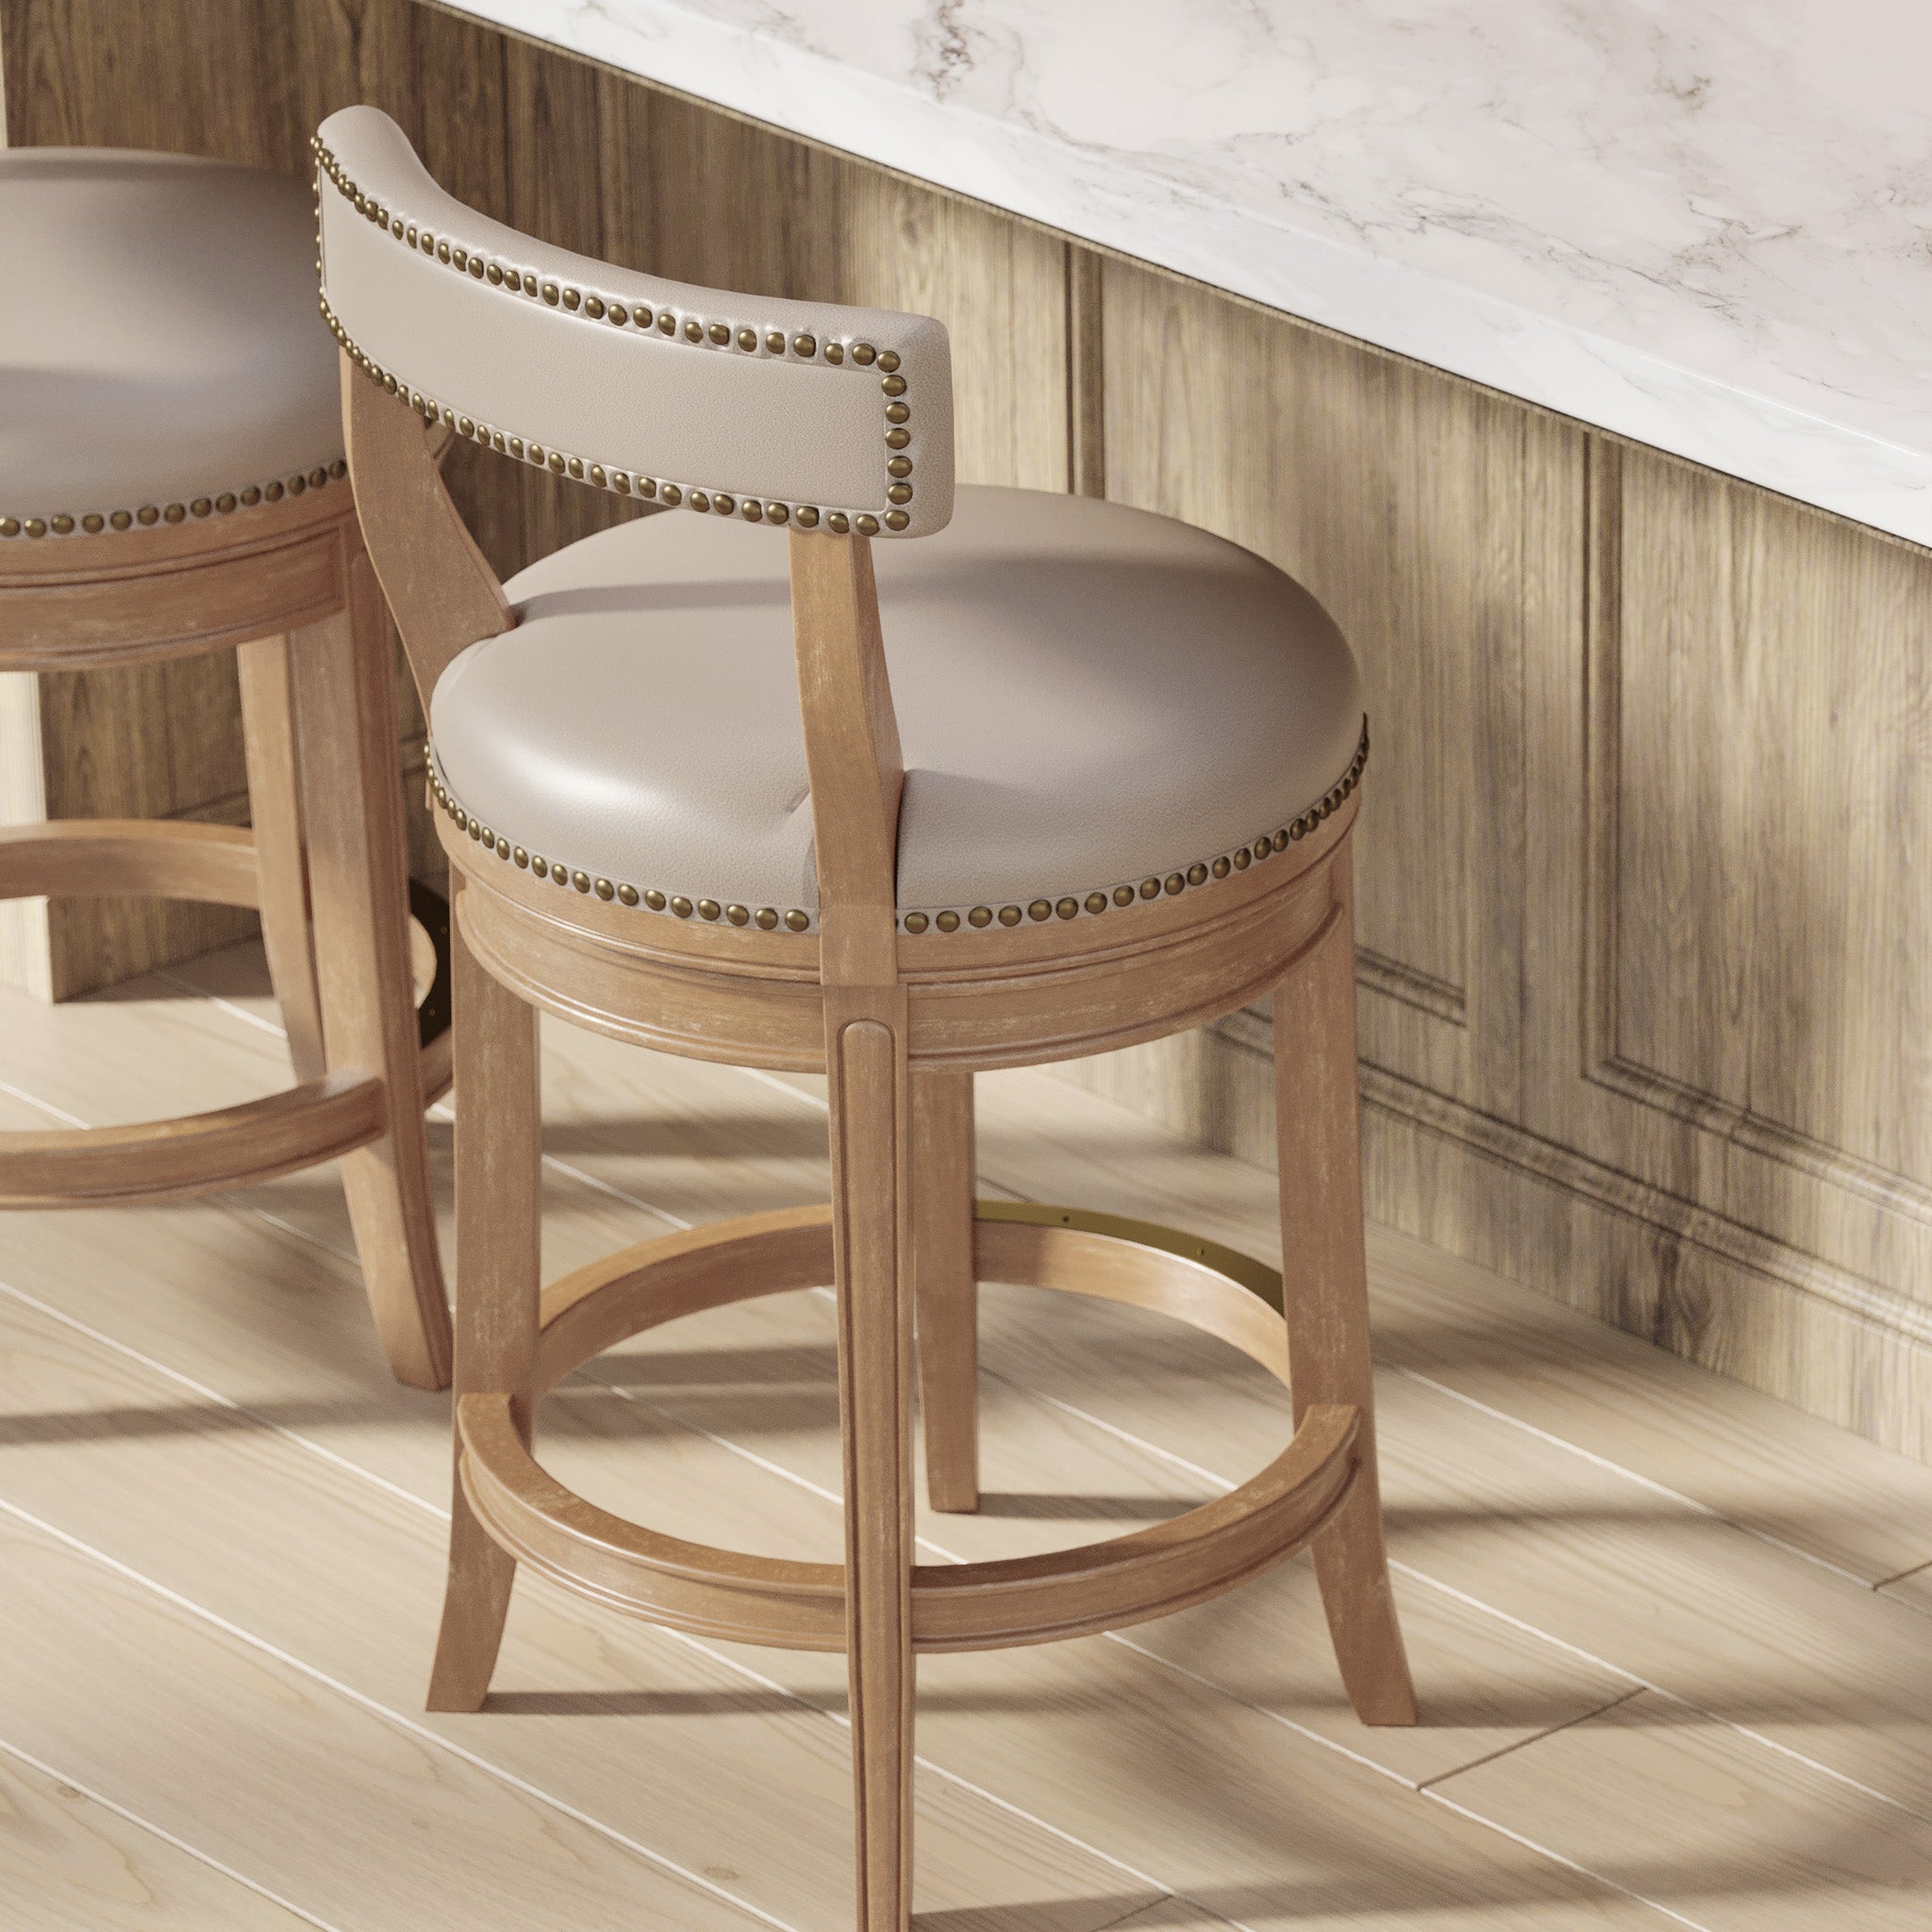 Alexander Counter Stool in Weathered Oak Finish with Avanti Bone Vegan Leather in Stools by Maven Lane